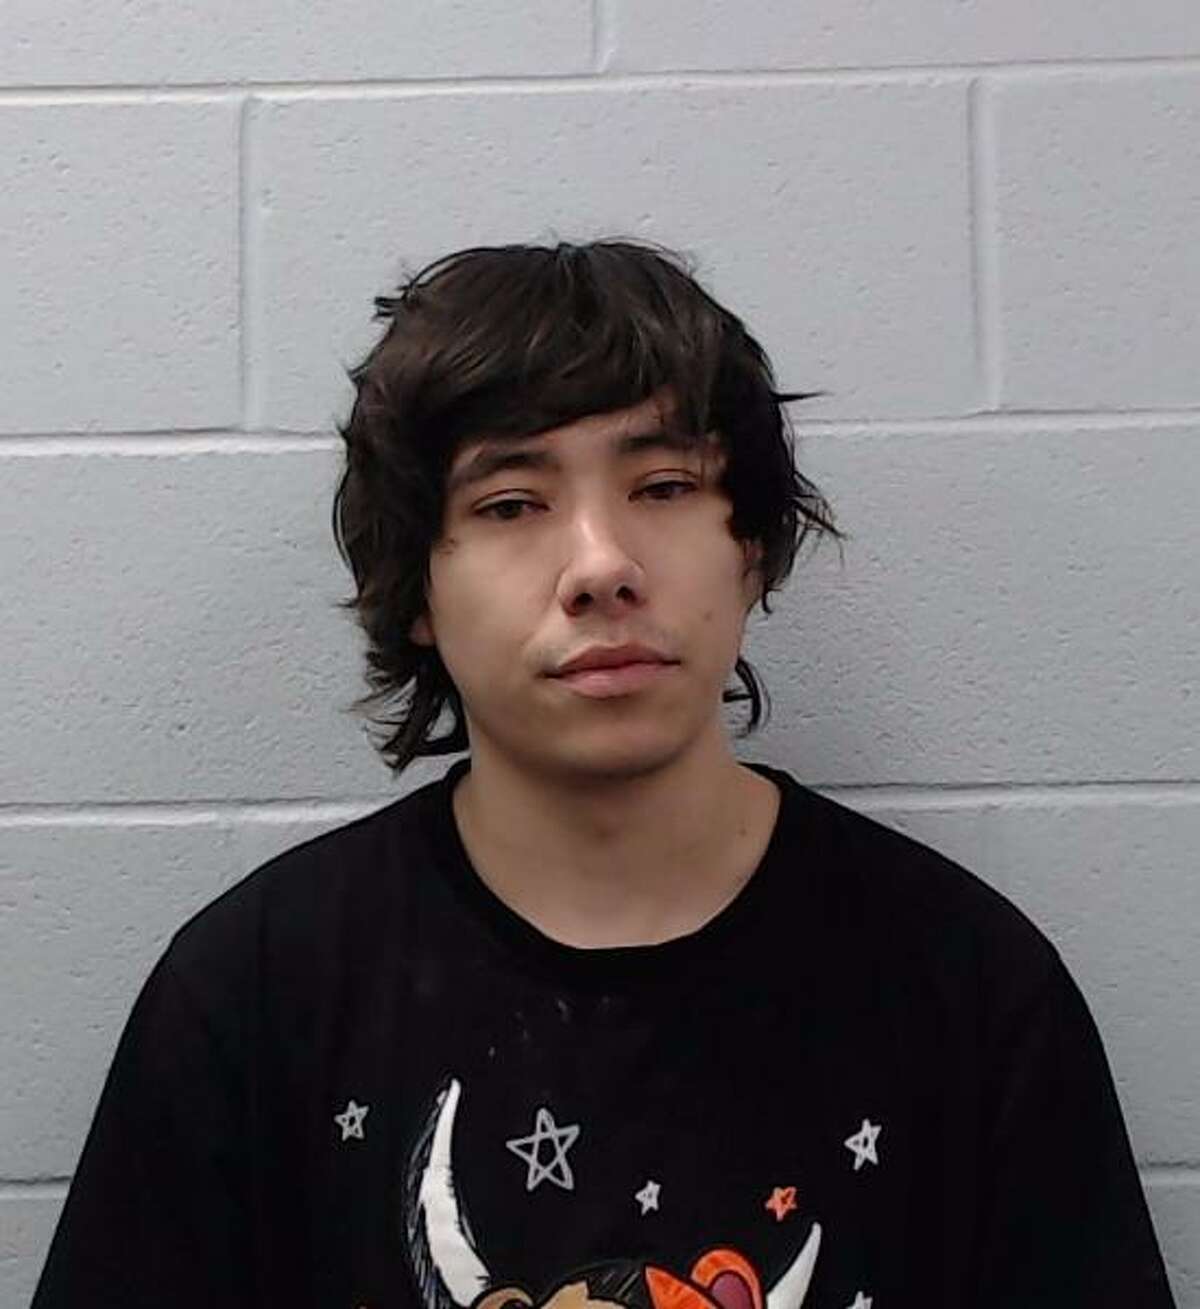 Giovanni Fernandez, 21, was arrested in connection with a hit-and-run collision that killed 31-year-old Adam Martinez.